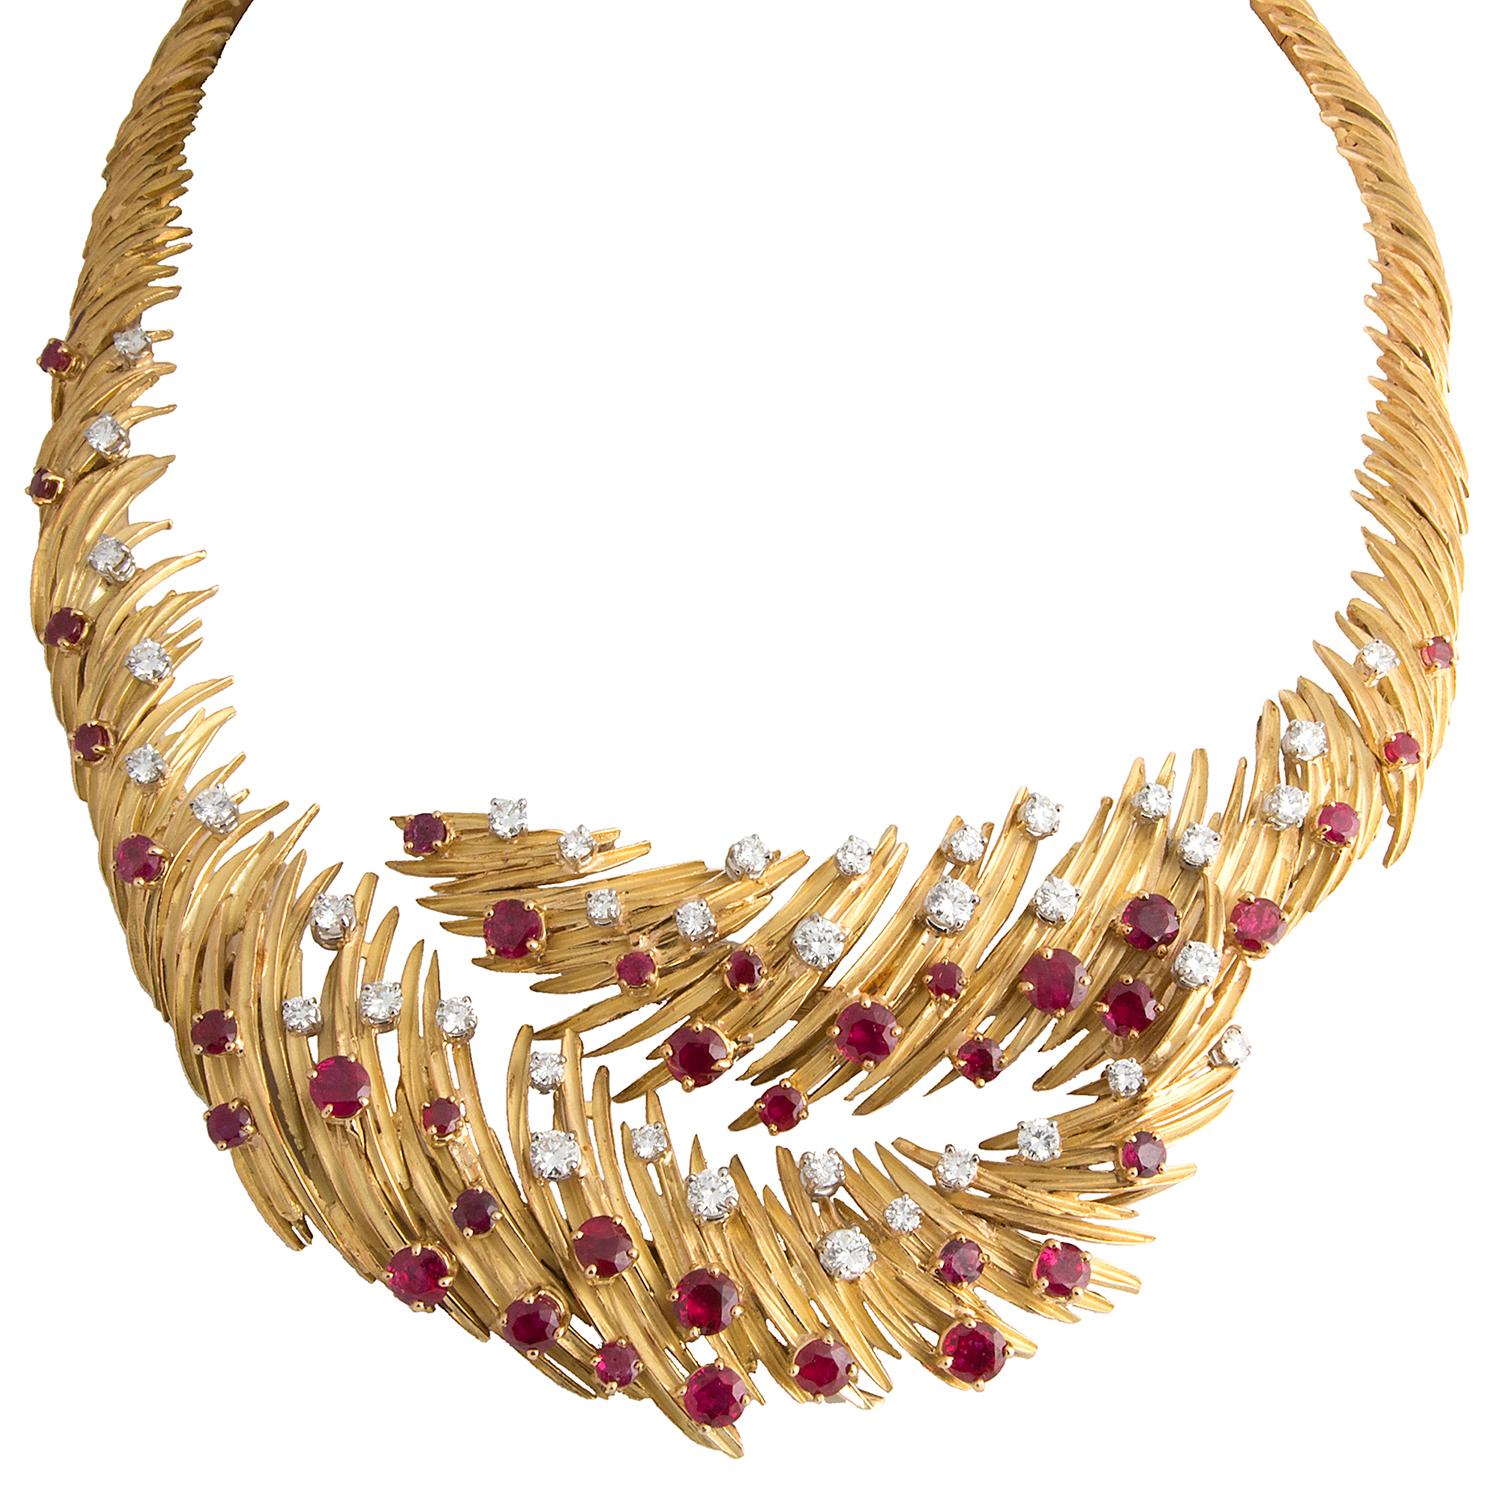 A very Important 5-piece parure by Mellerio 'dit Meller' Paris, designed as stylised feathers, in 18k mat and polished yellow gold set with over 40 Cts Burmese rubies and app. 25-30 Cts of brilliant cut diamonds. Compromising a bombé ring,  a pair